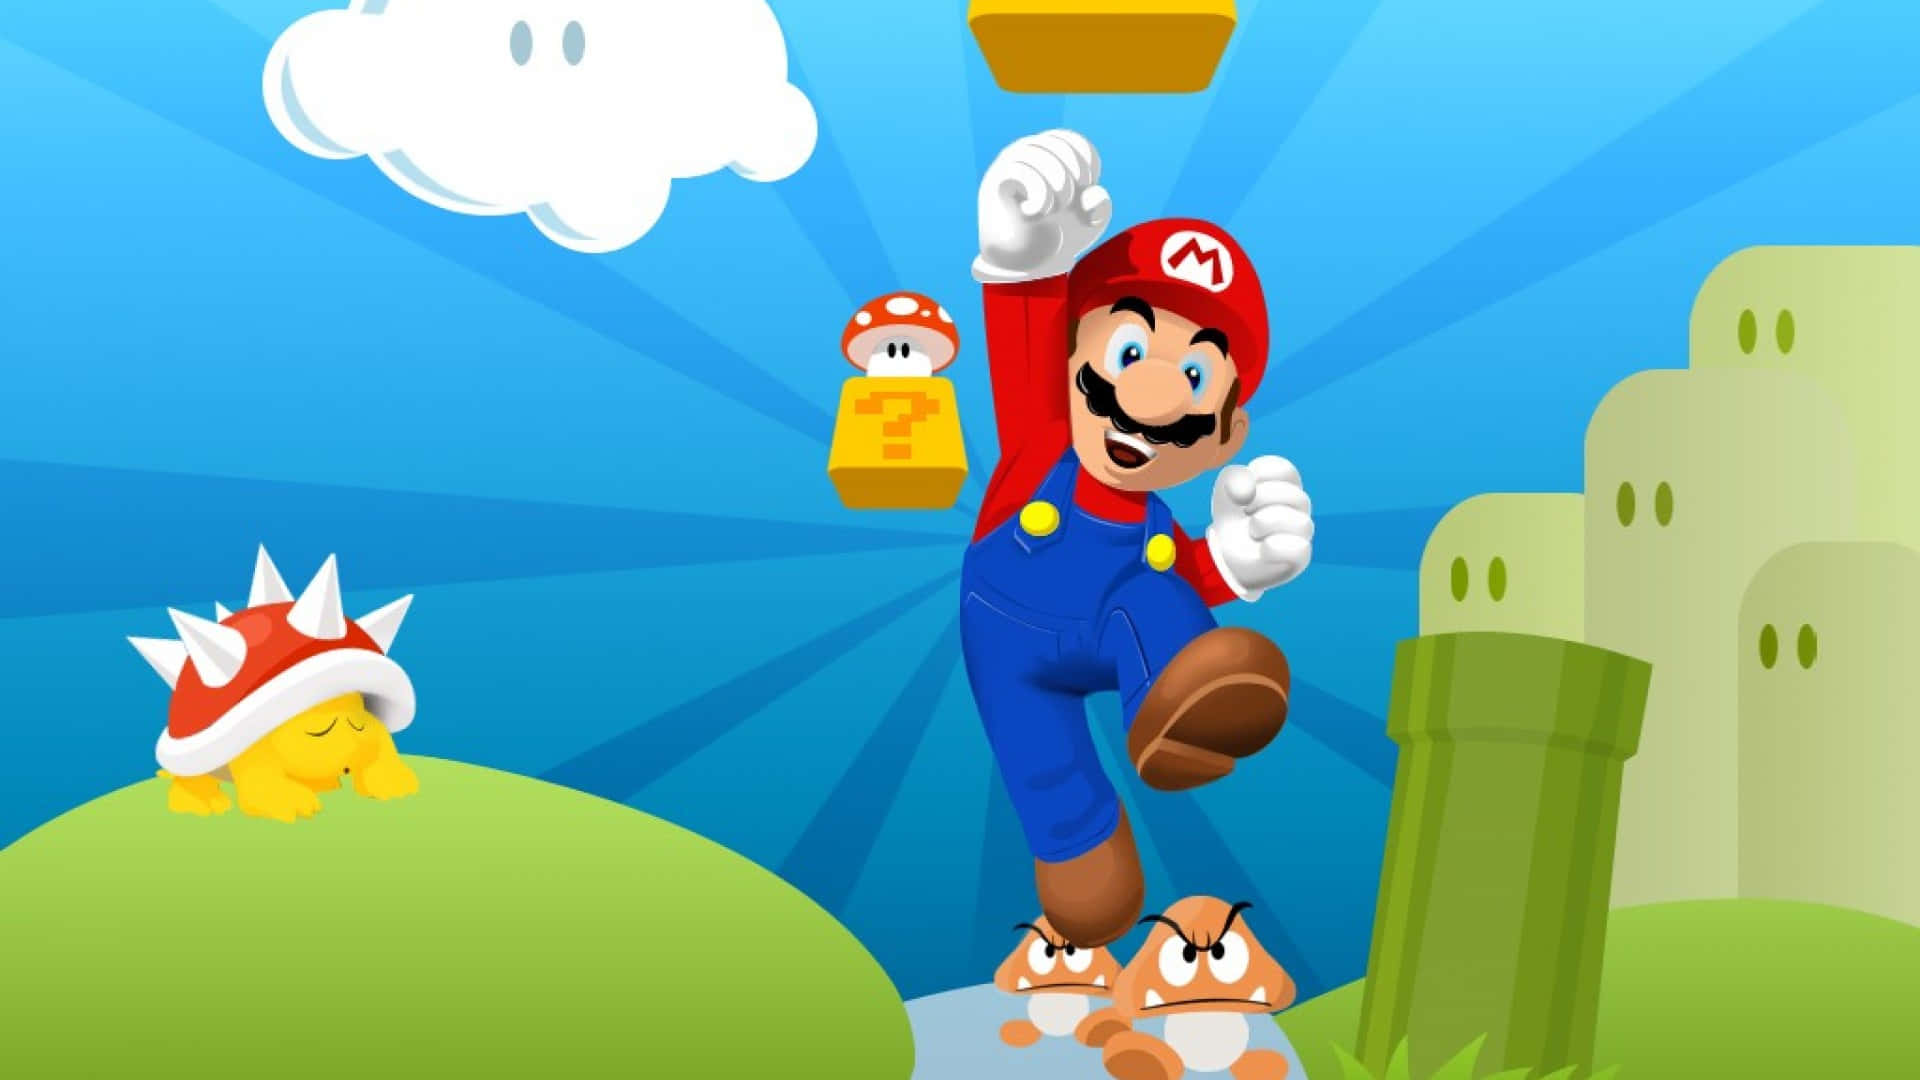 Cool Mario Strikes A Pose In This Iconic Video Game Scene.